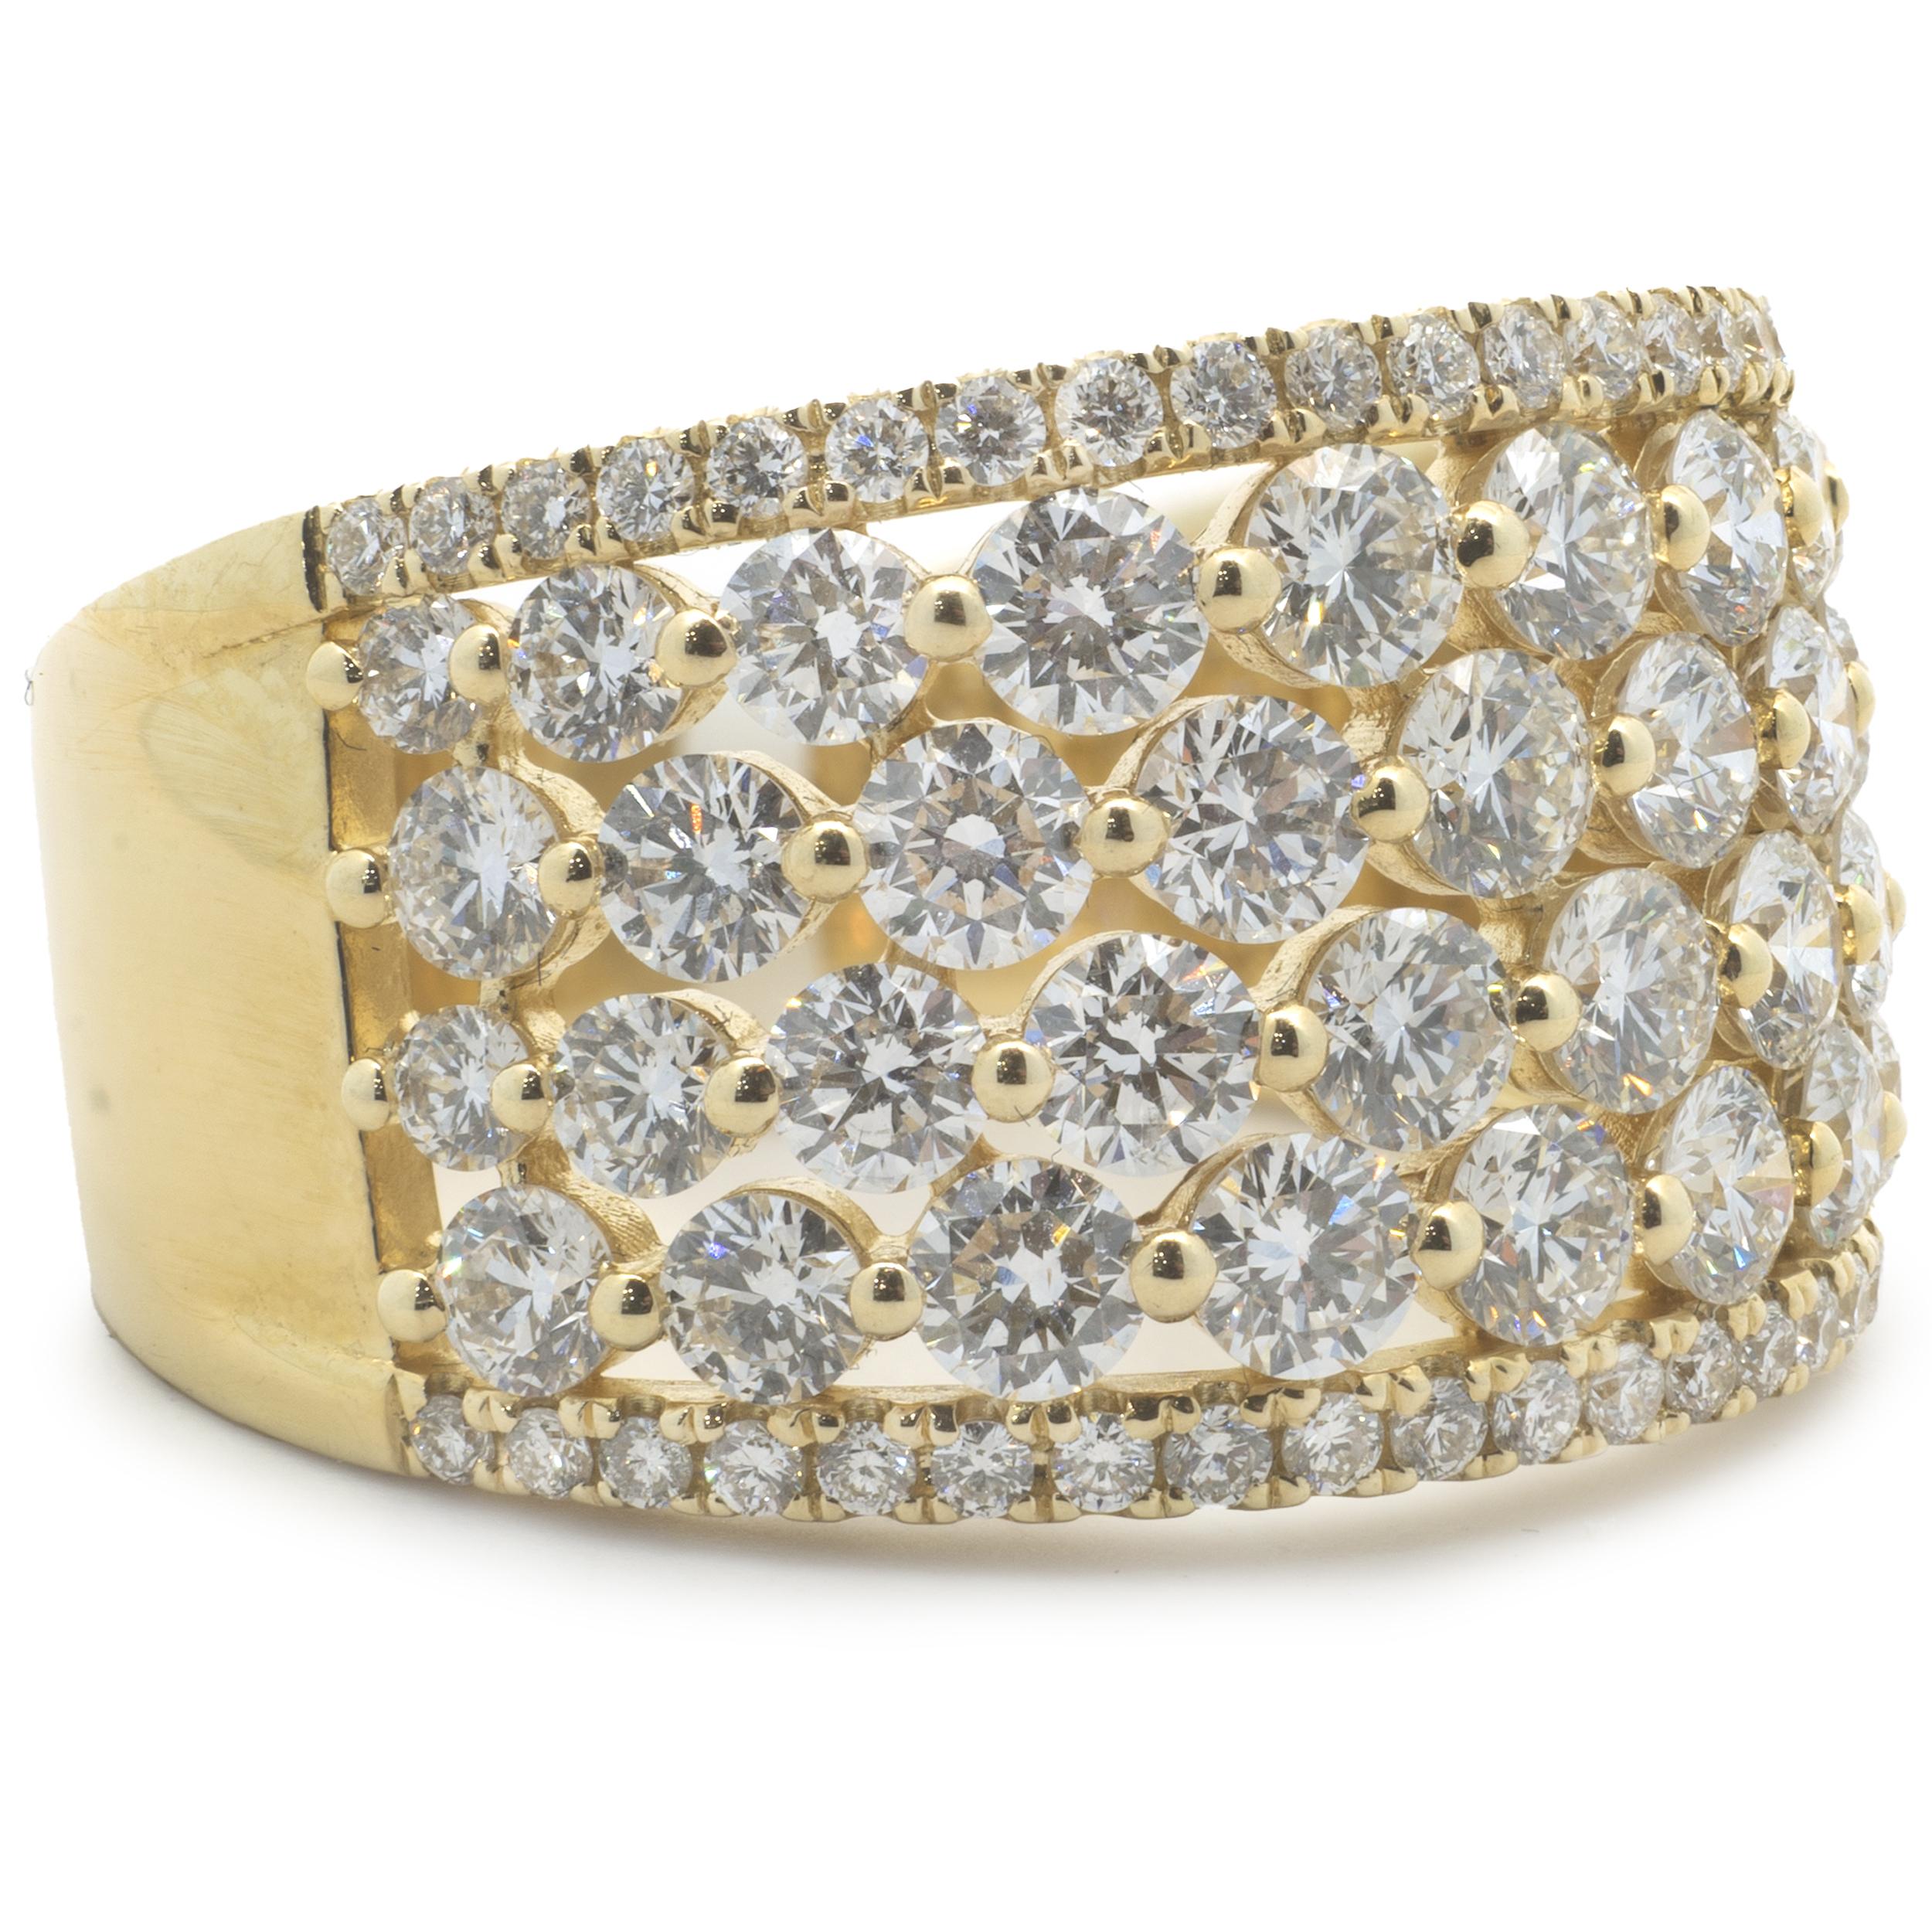 Designer: custom
Material: 14K yellow gold
Diamond: 80 round brilliant cut = 2.47cttw
Color: G
Clarity: SI1
Ring size: 6.5 (please allow two additional shipping days for sizing requests)
Weight:  7.21 grams
